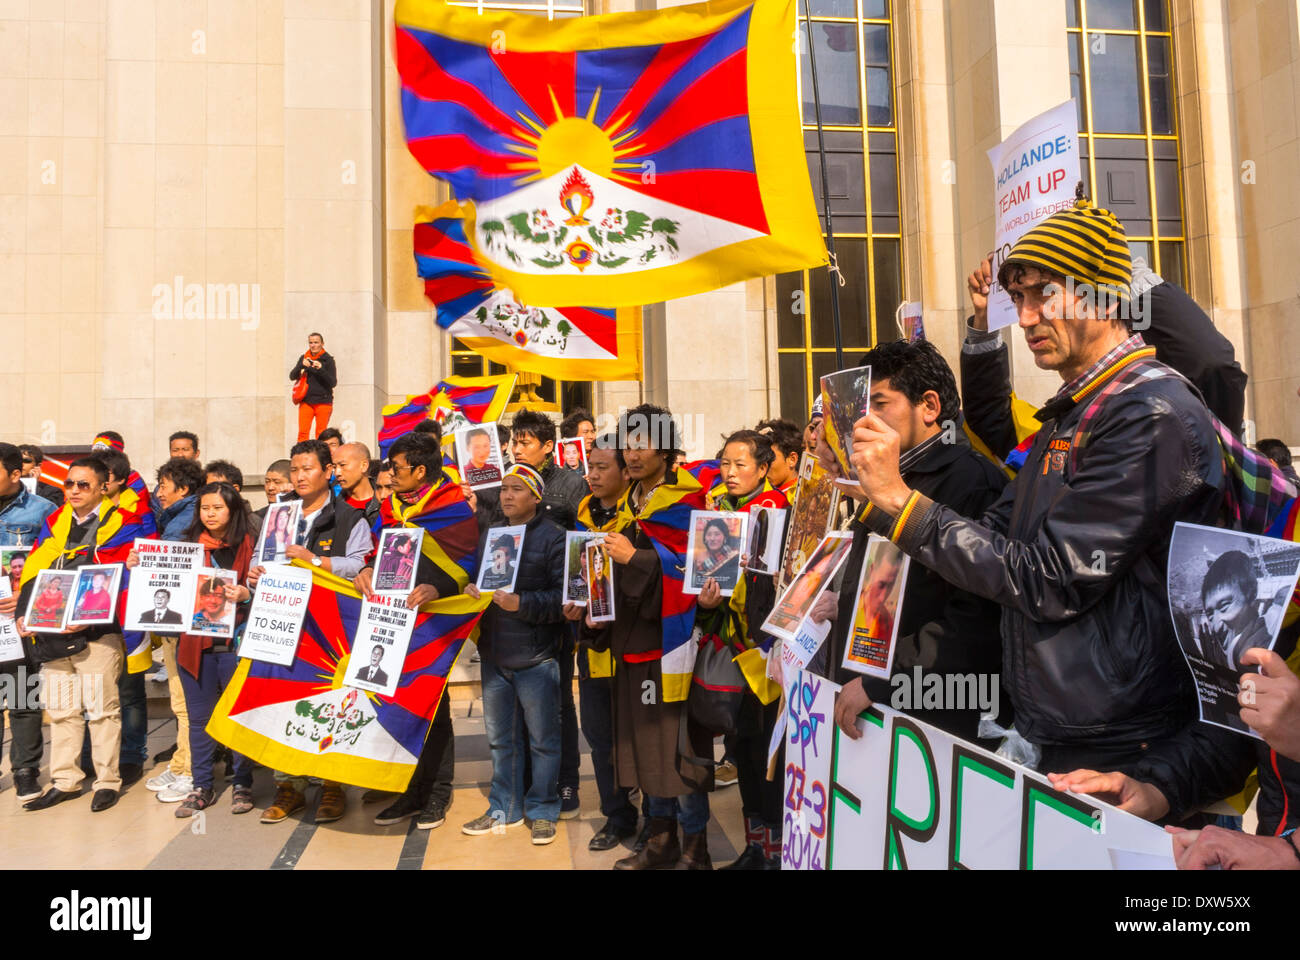 Large Cowd People, Front, The Tibetan, Taiwanese Ethnic Communities of France, and Friends called for French citizens to mobilize during the visit of Chinese President  in Paris protest for justice, protest against china, tibetan activists, international Politics Stock Photo